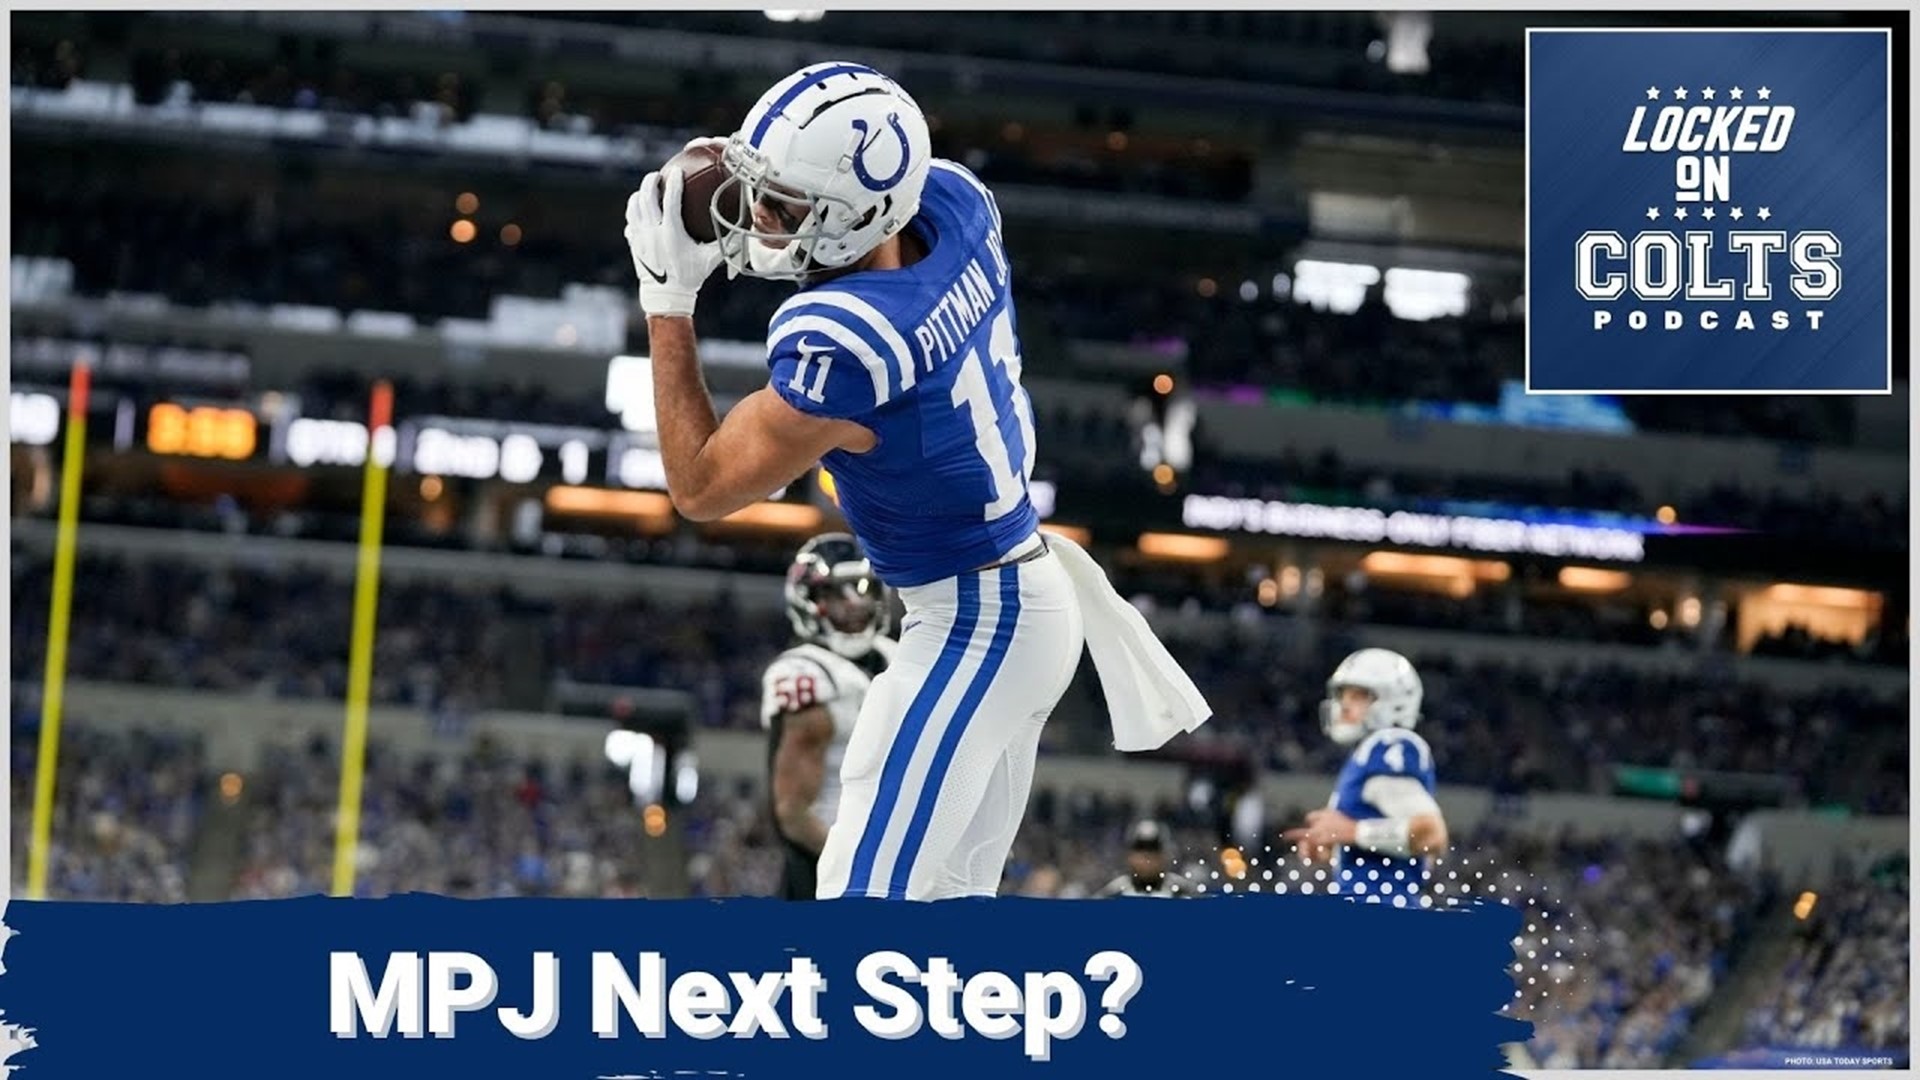 The Indianapolis Colts have quite a few intriguing pass catchers on the roster. Can Michael Pittman Jr firmly establish himself as a star receiver this season?